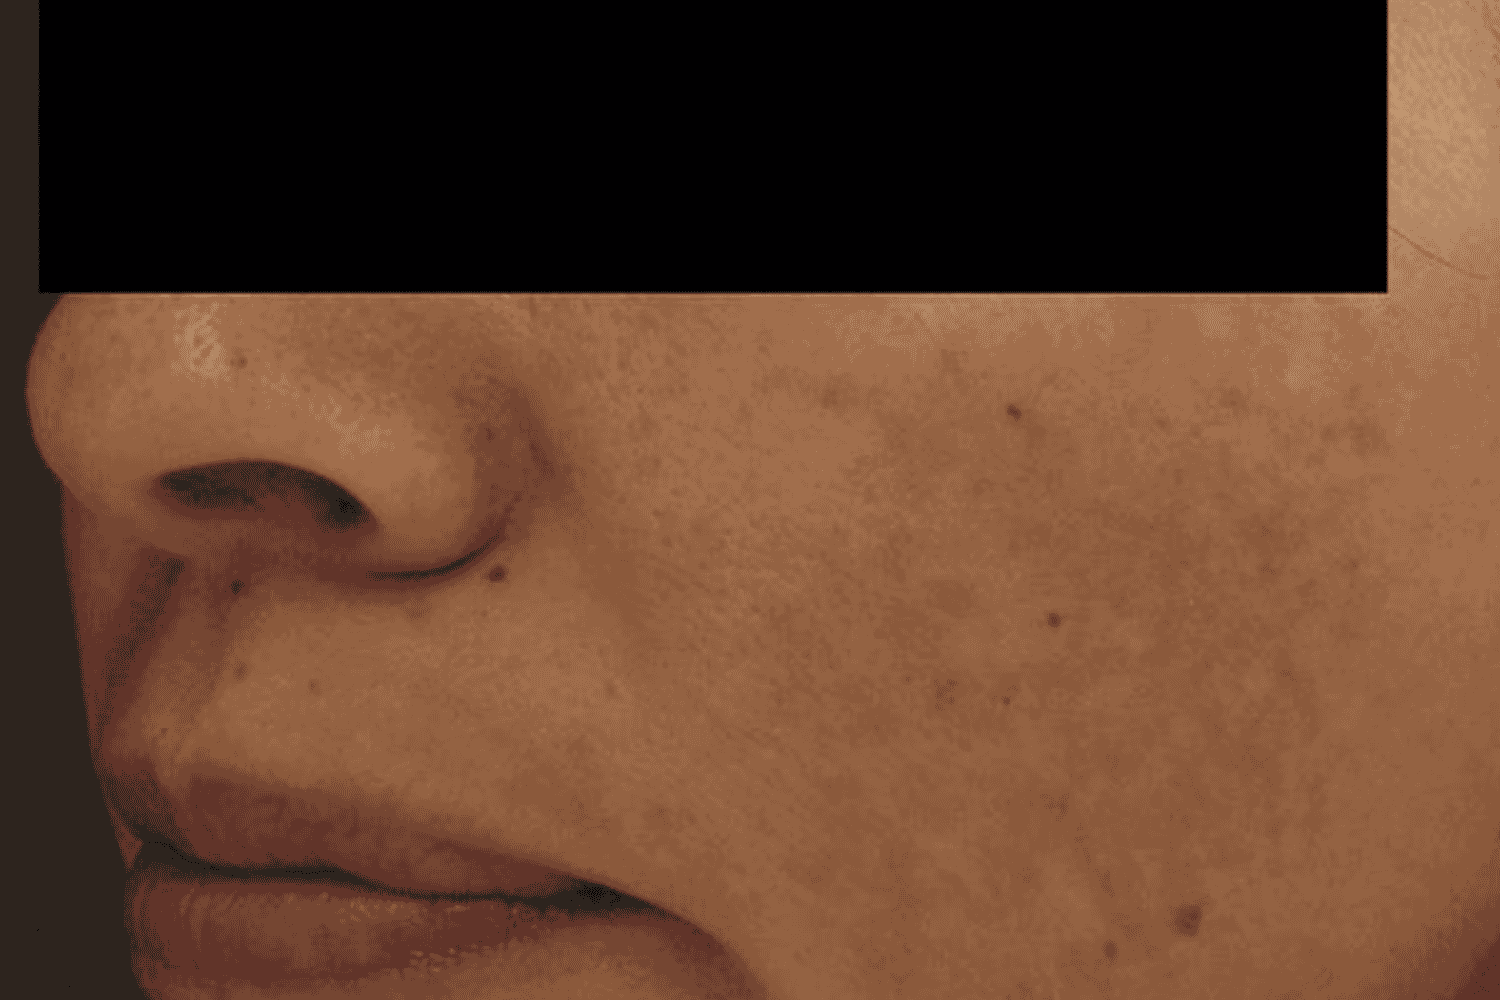 A close up of cheek after Laser Genesis for Skin Tightening treatment at Regeneris